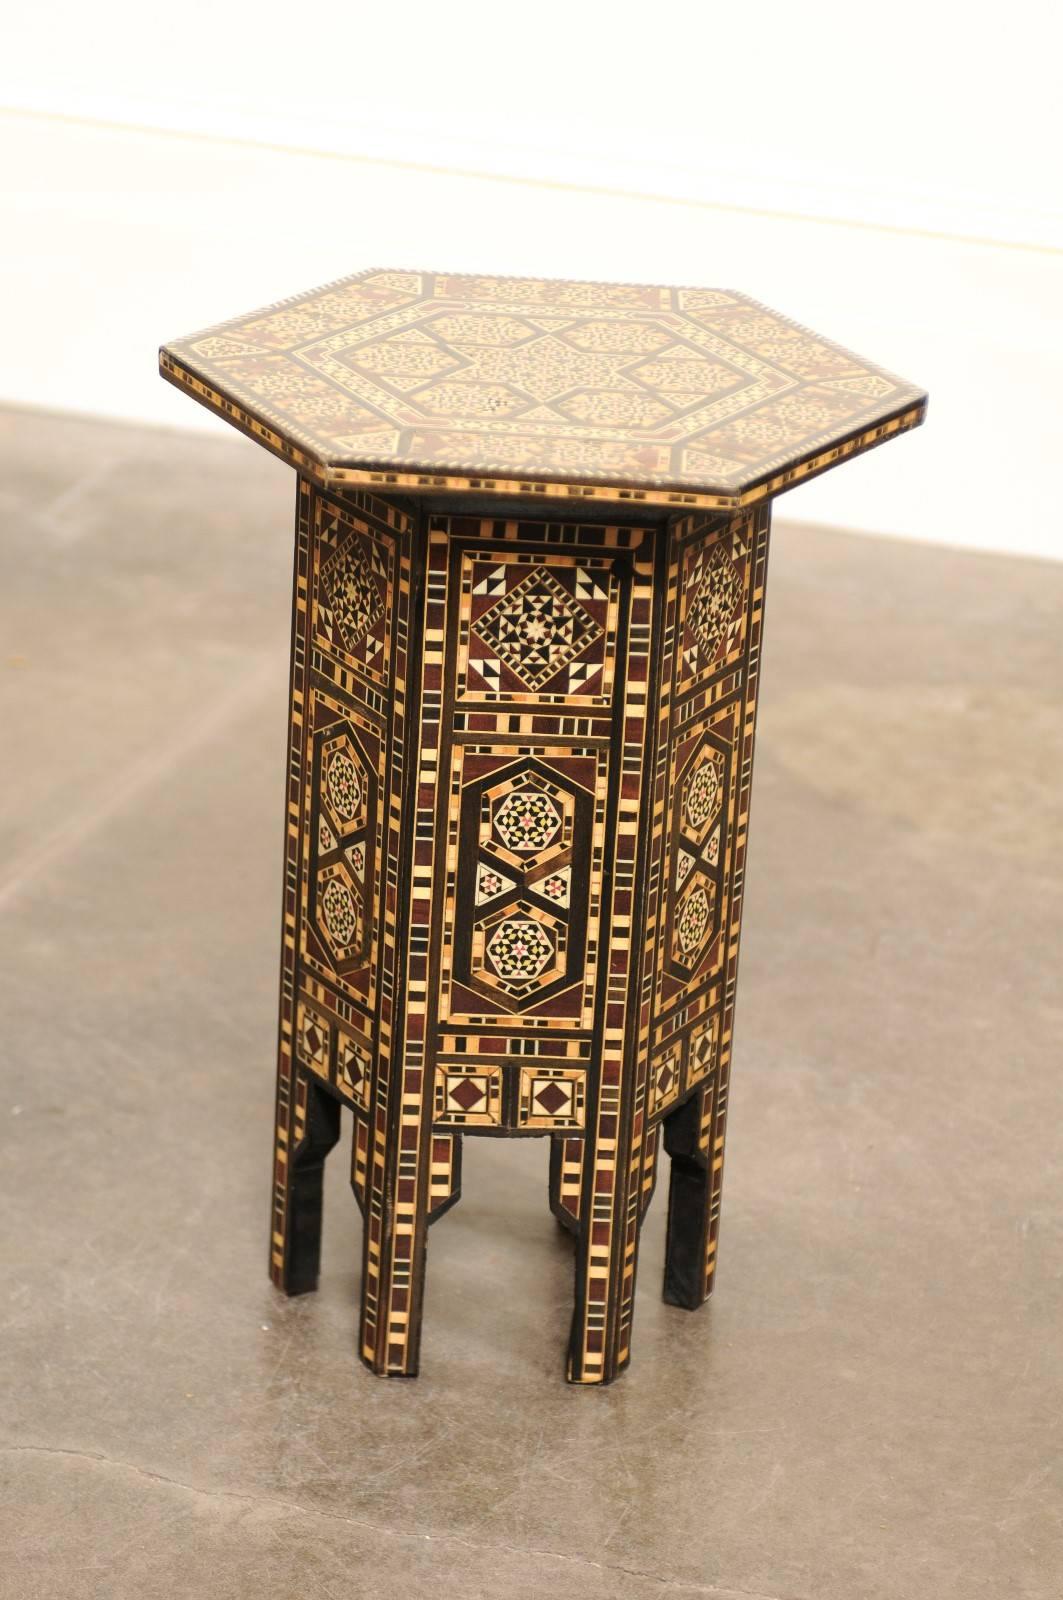 This petite Moroccan drinks table from the Mid-Century features an hexagonal top adorned with a delicate wood and bone inlay depicting an elaborate geometrical design with central star. Each panel of the hexagonal base shows a sumptuous decorative